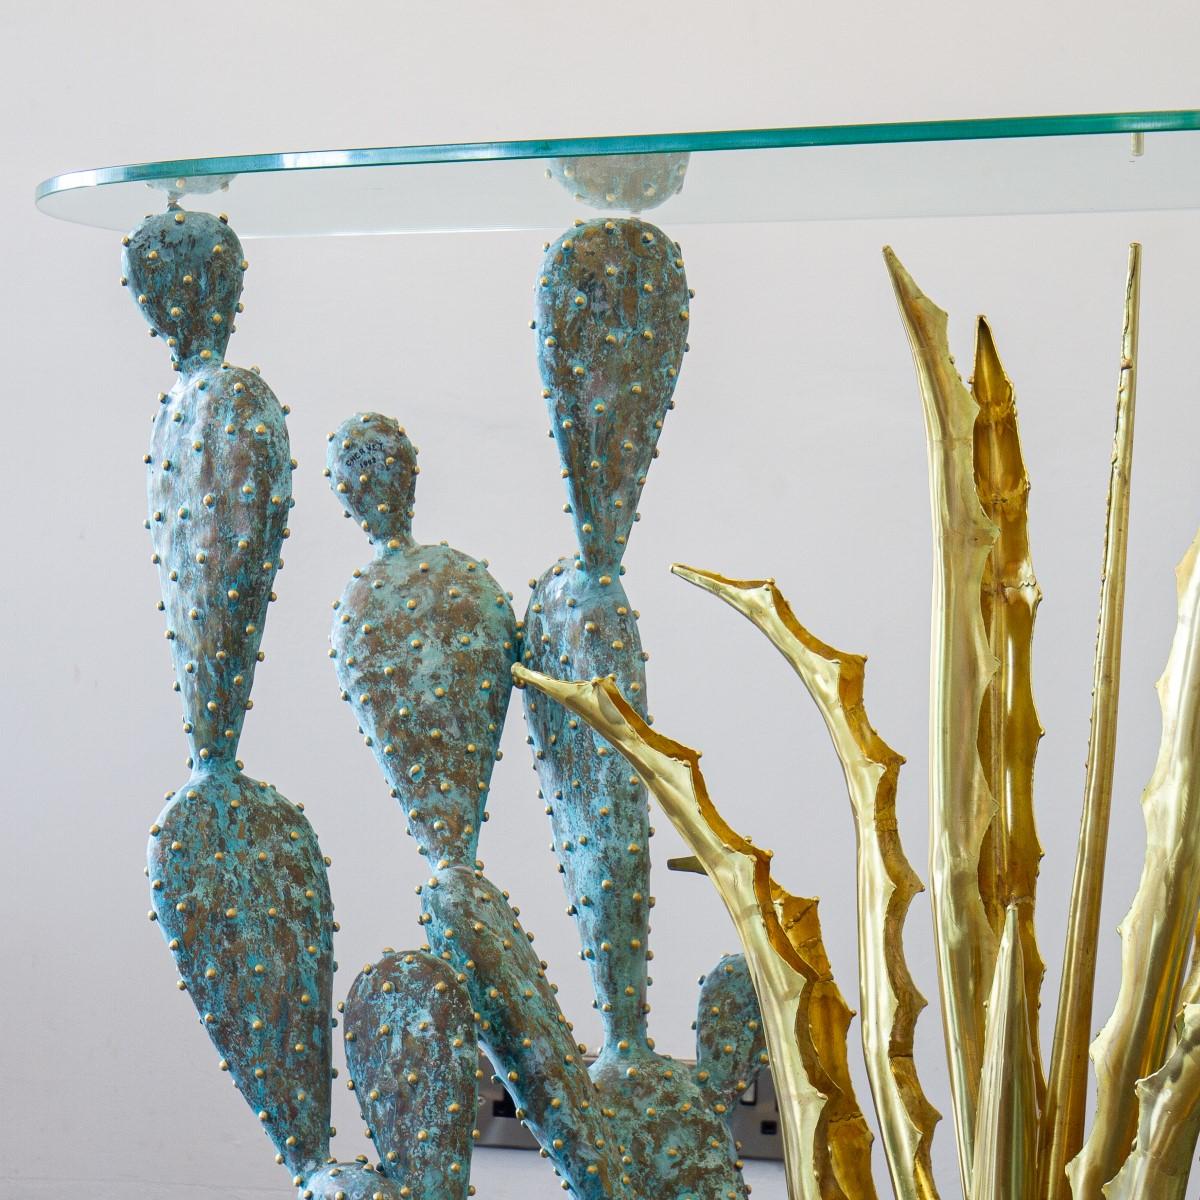 A gilded and oxidized brass cacti sculpture complete with a glass top to create a console table, titled 'Tulum' created by Alain Chervet in 1992, Signed and dated. The console base comprises of oxidised brass prickly pear cacti with gilt spike